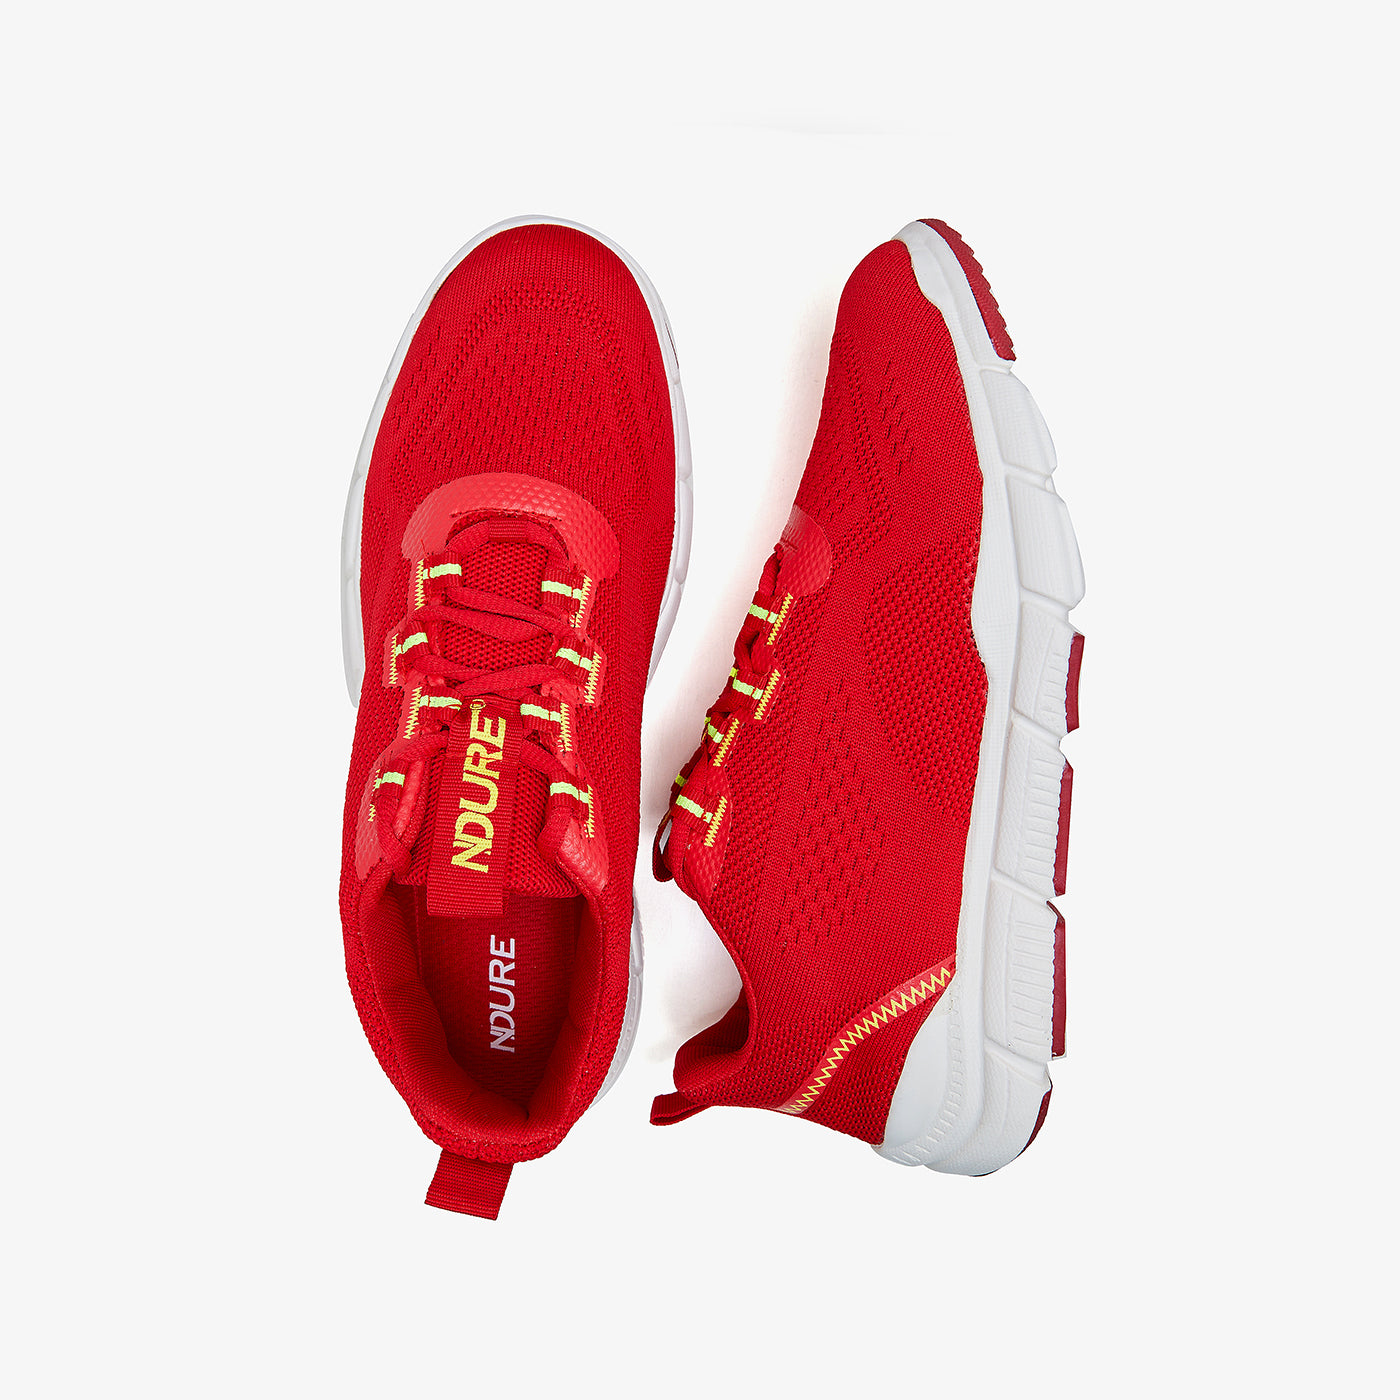 Men's Lace Fastening Sports Shoes